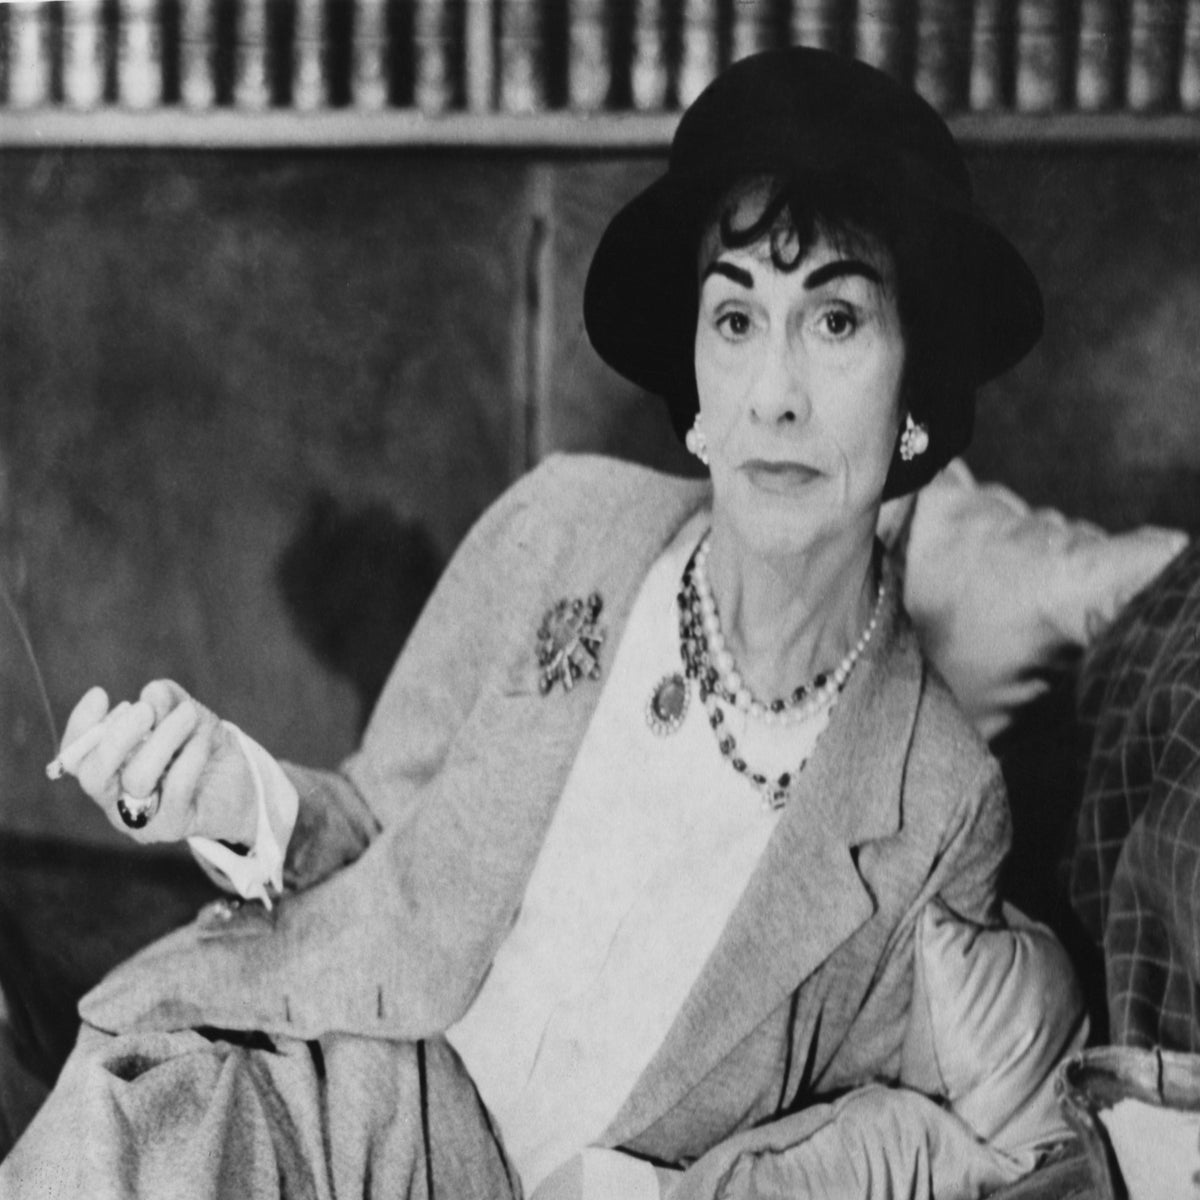 Coco Chanel's legacy: 'She embodied the brand and lifestyle. It's